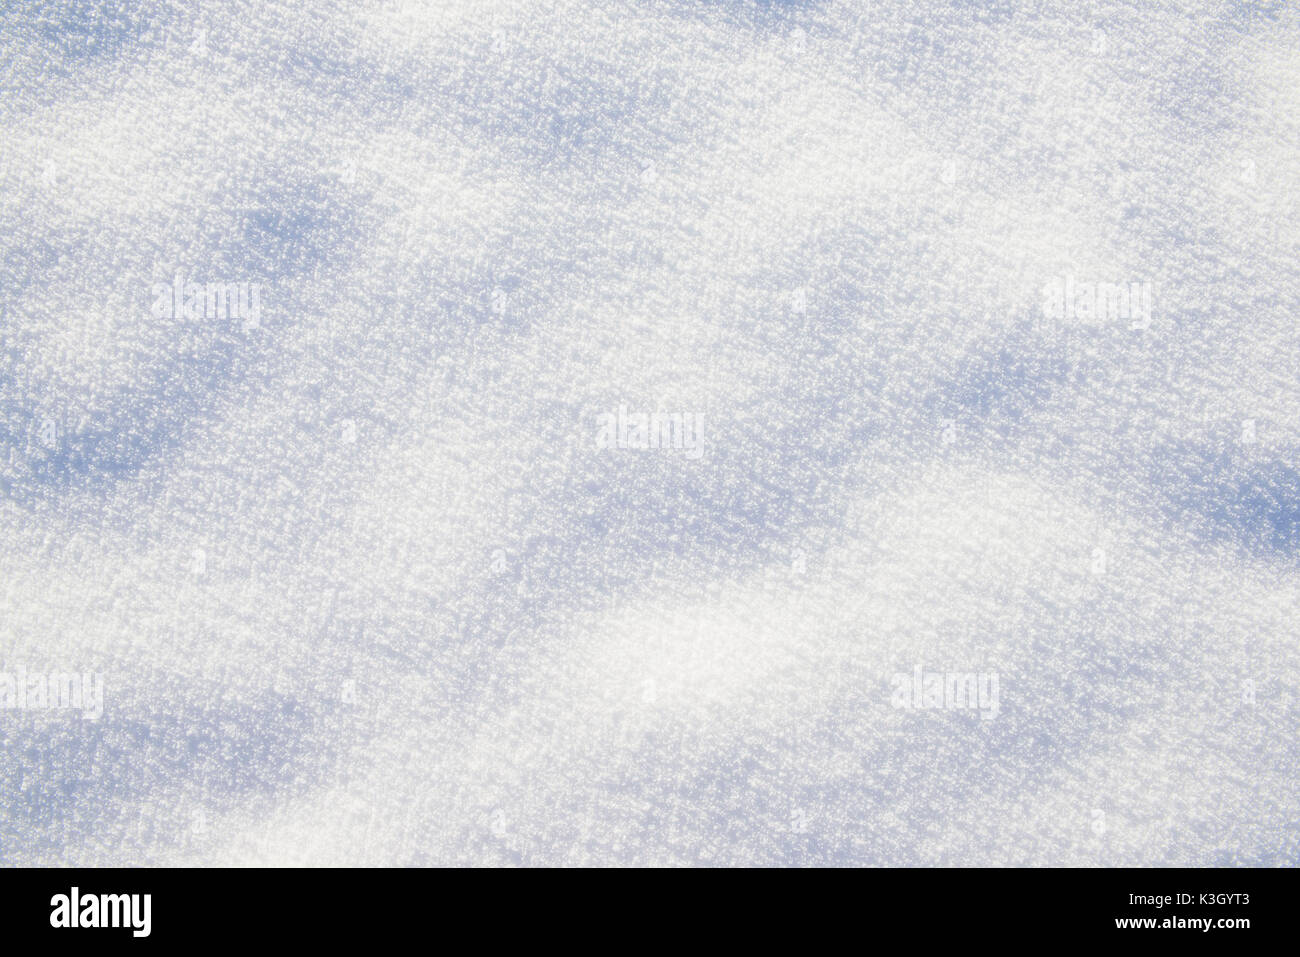 Untouched surface of fresh snowfall Stock Photo